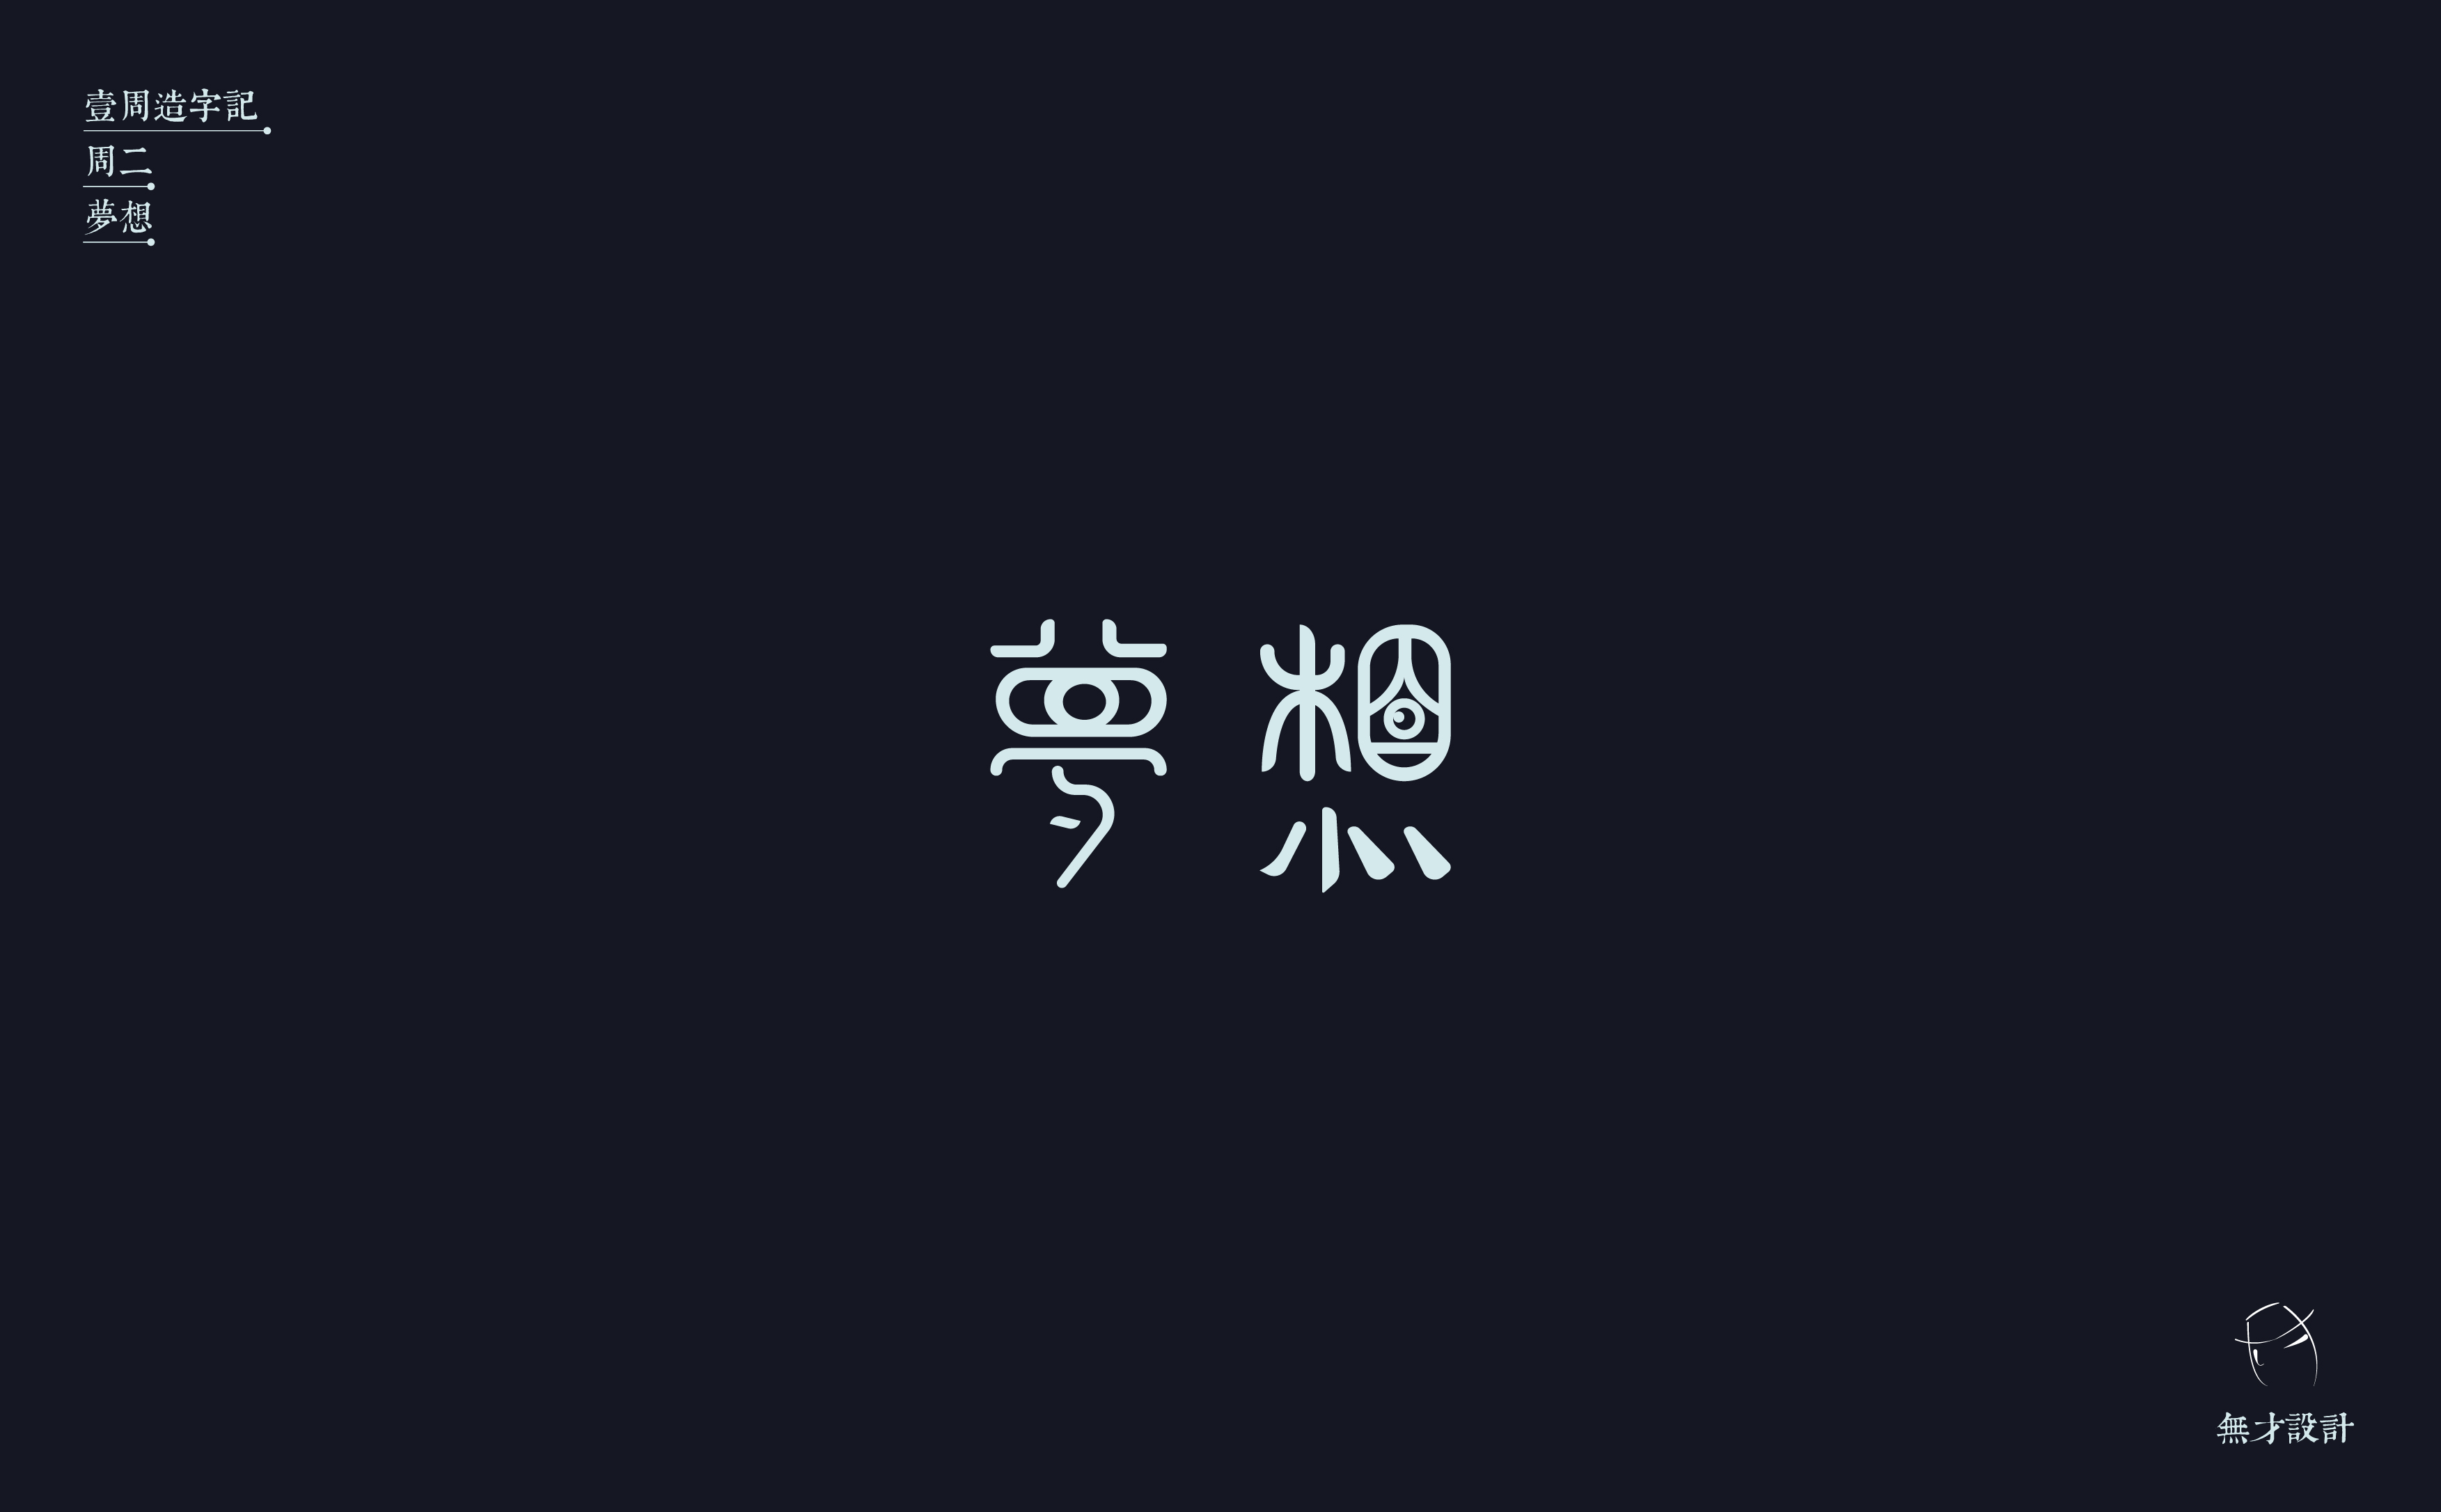 display chinese character in font style